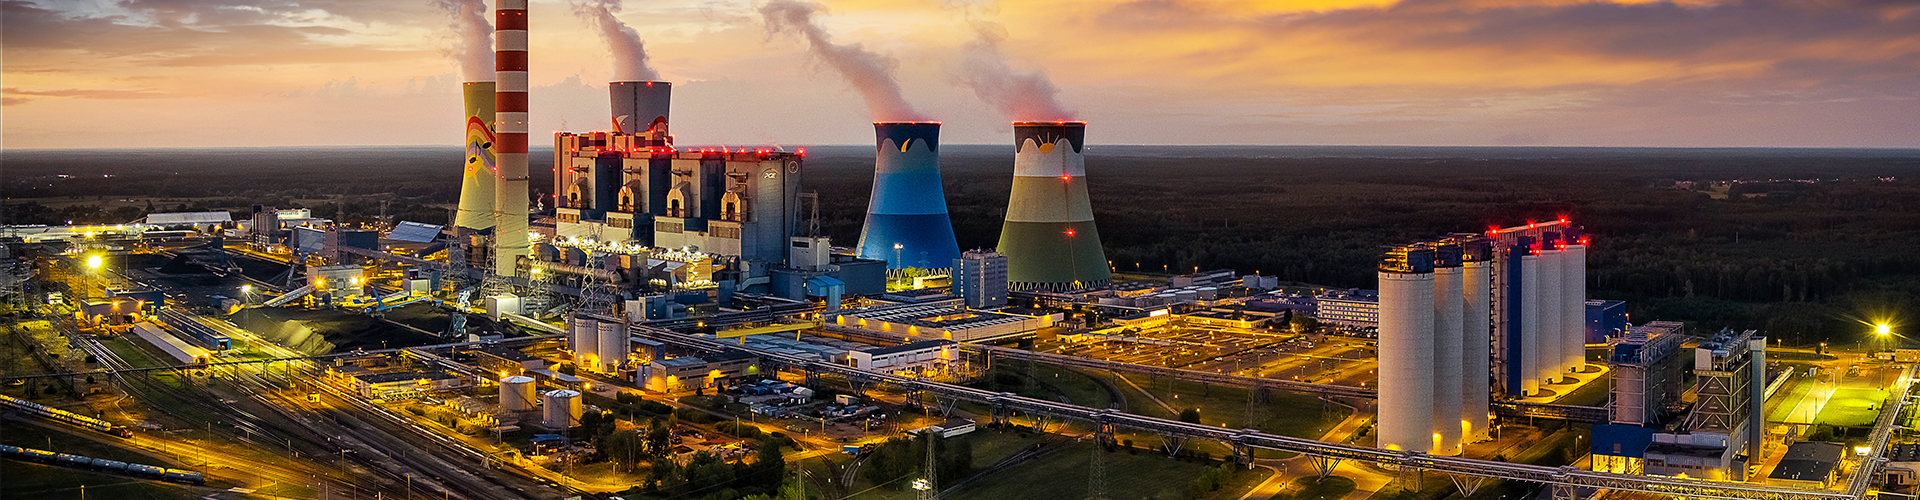 Power plant at sunset